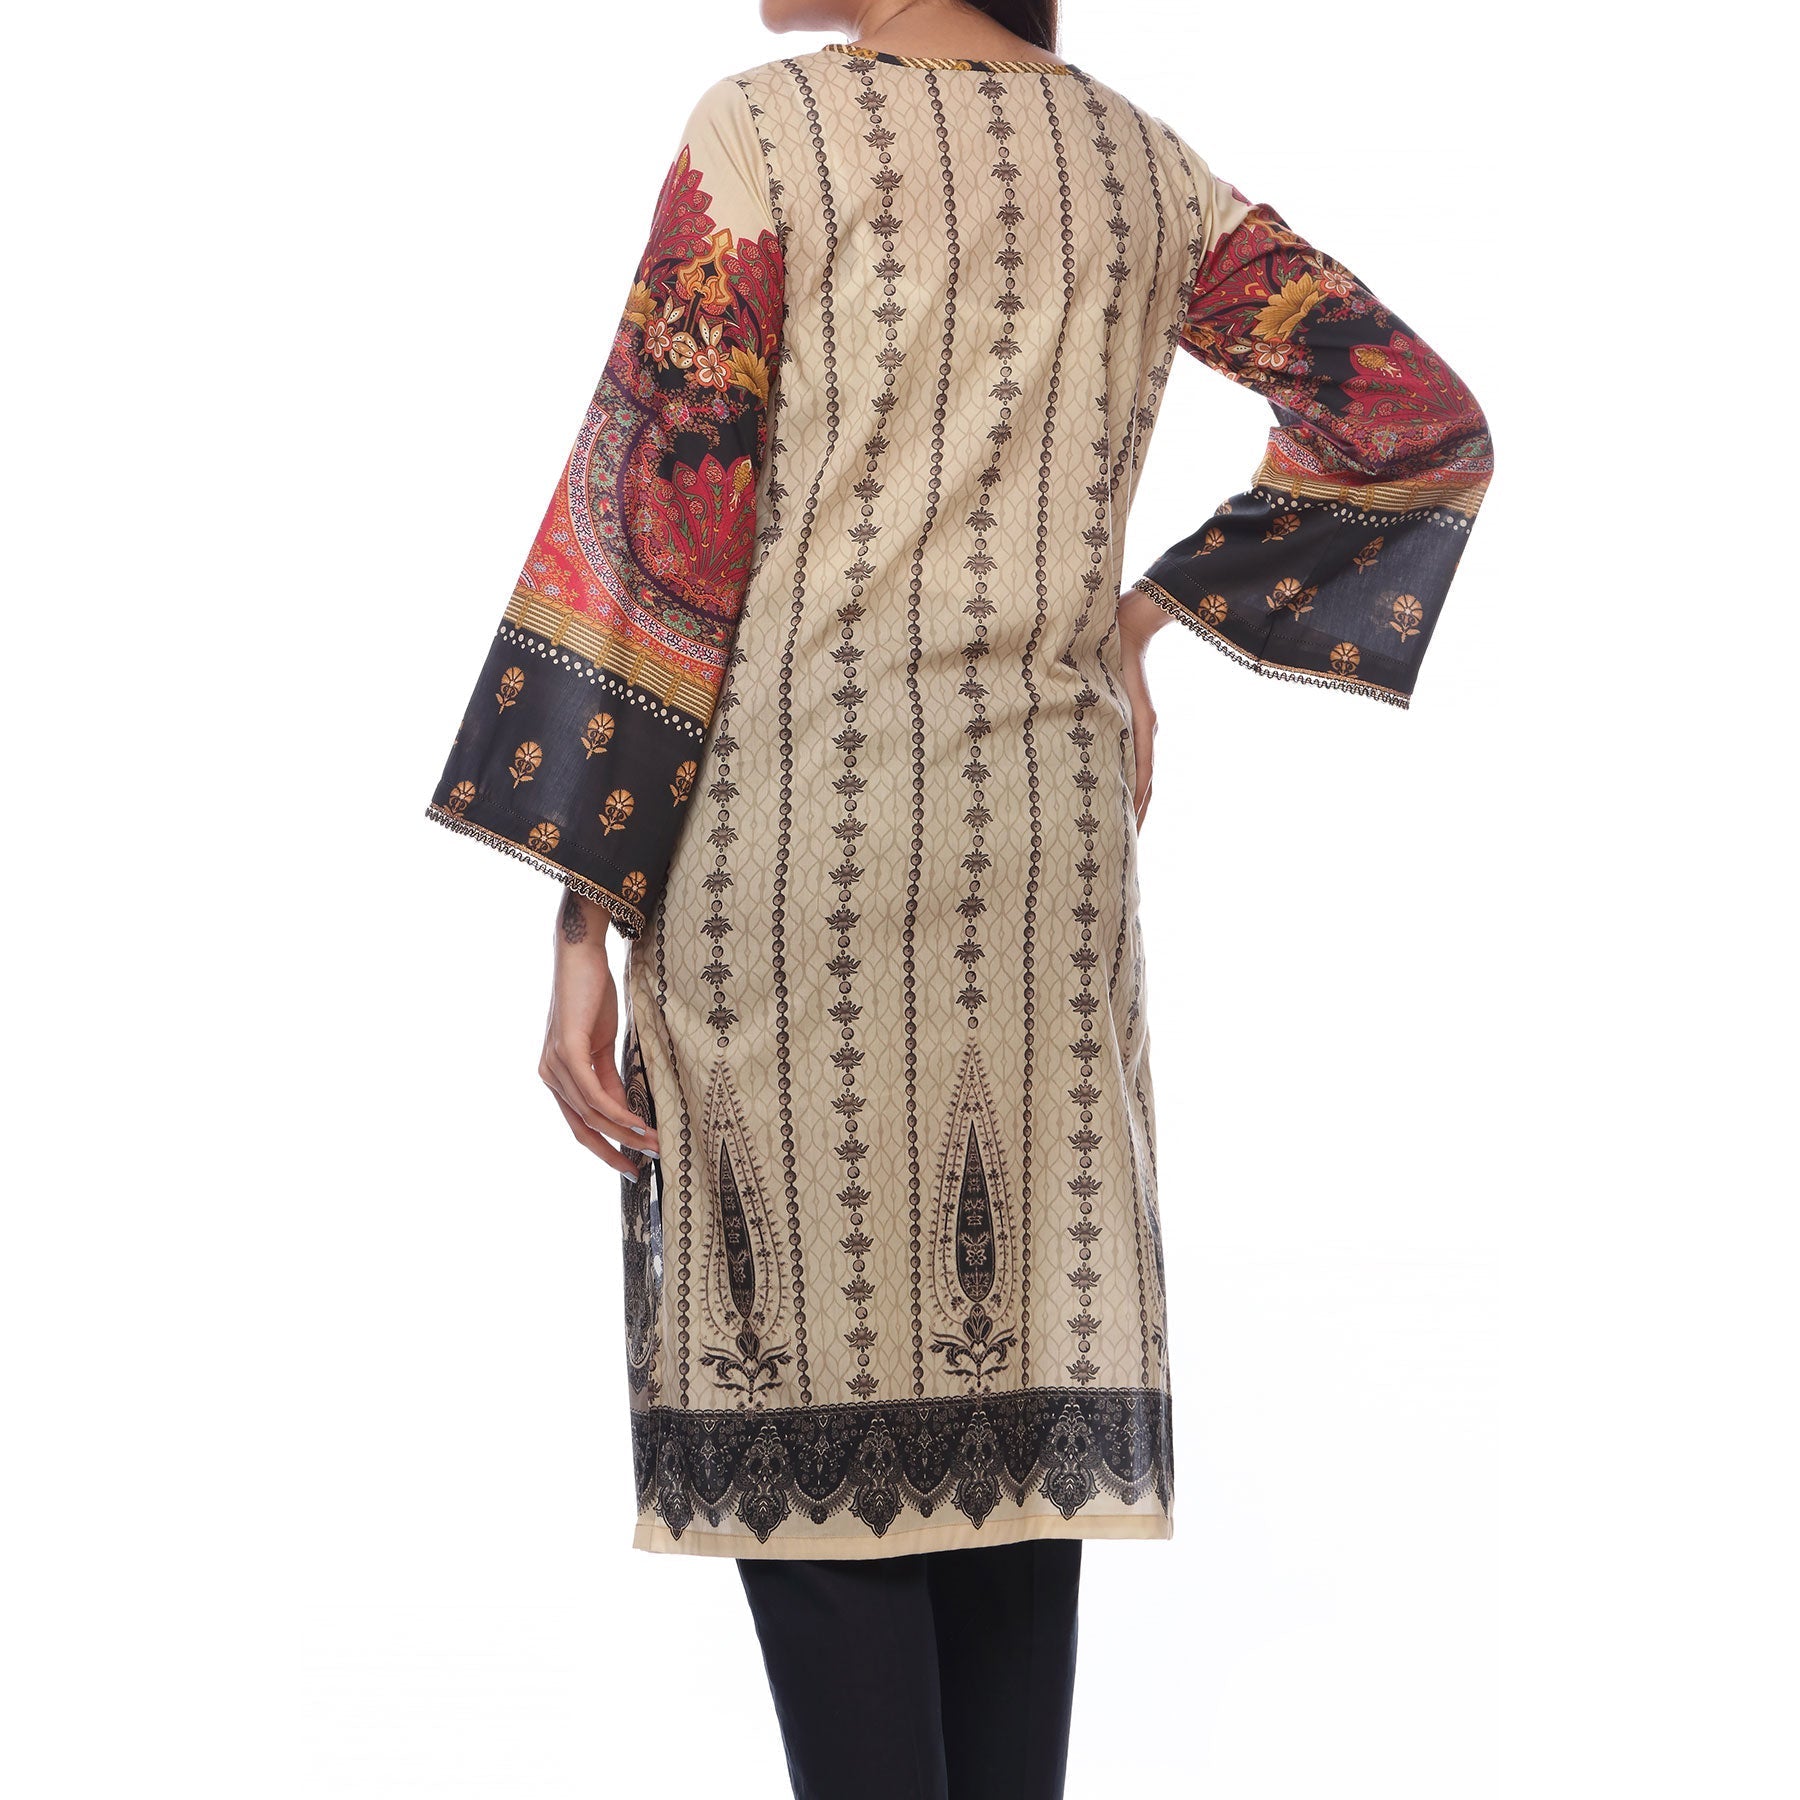 Digital Printed Lawn Shirt With Embroiderd Neck Line